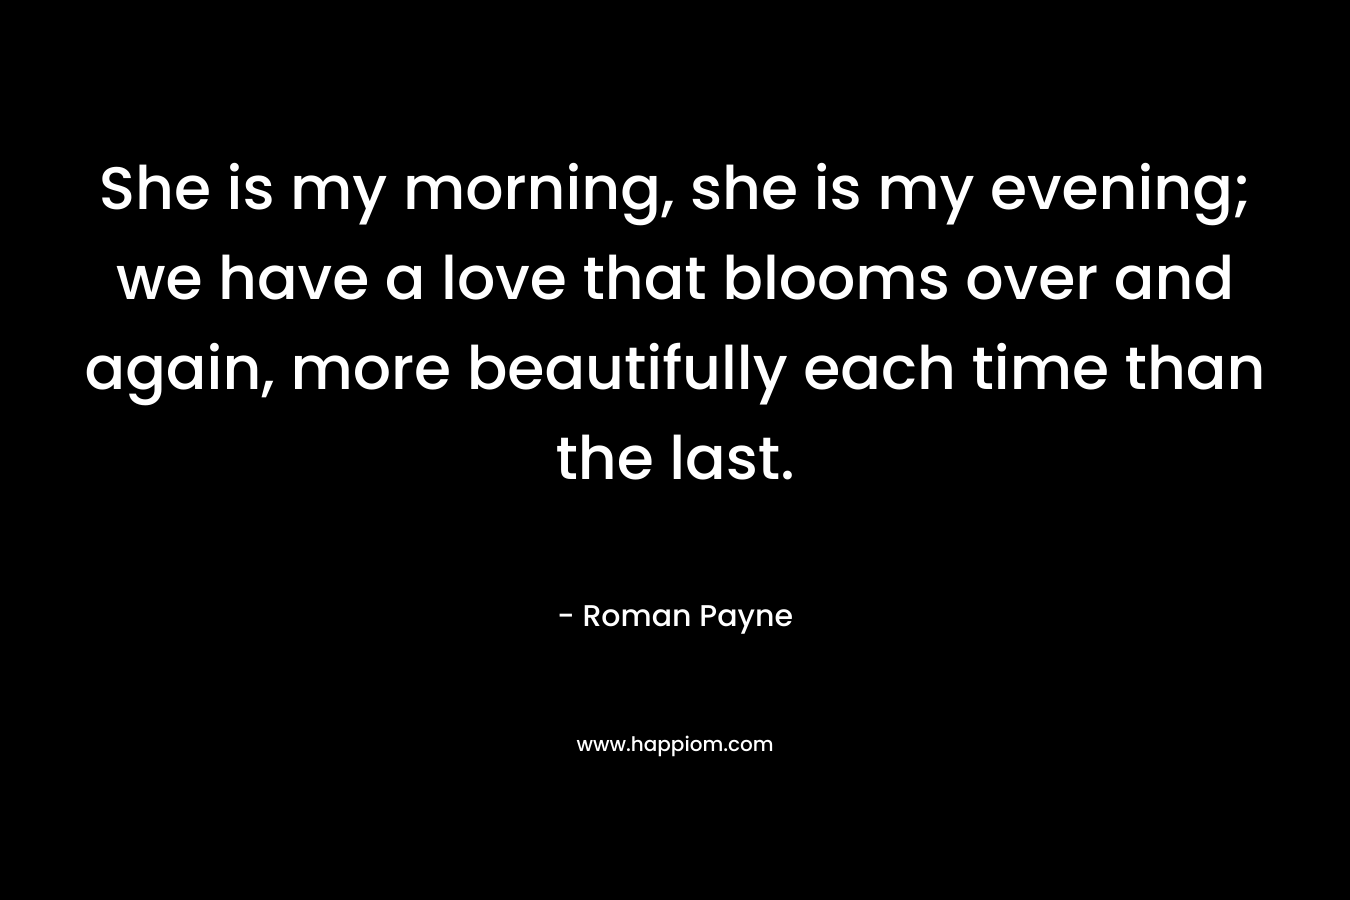 She is my morning, she is my evening; we have a love that blooms over and again, more beautifully each time than the last. – Roman Payne